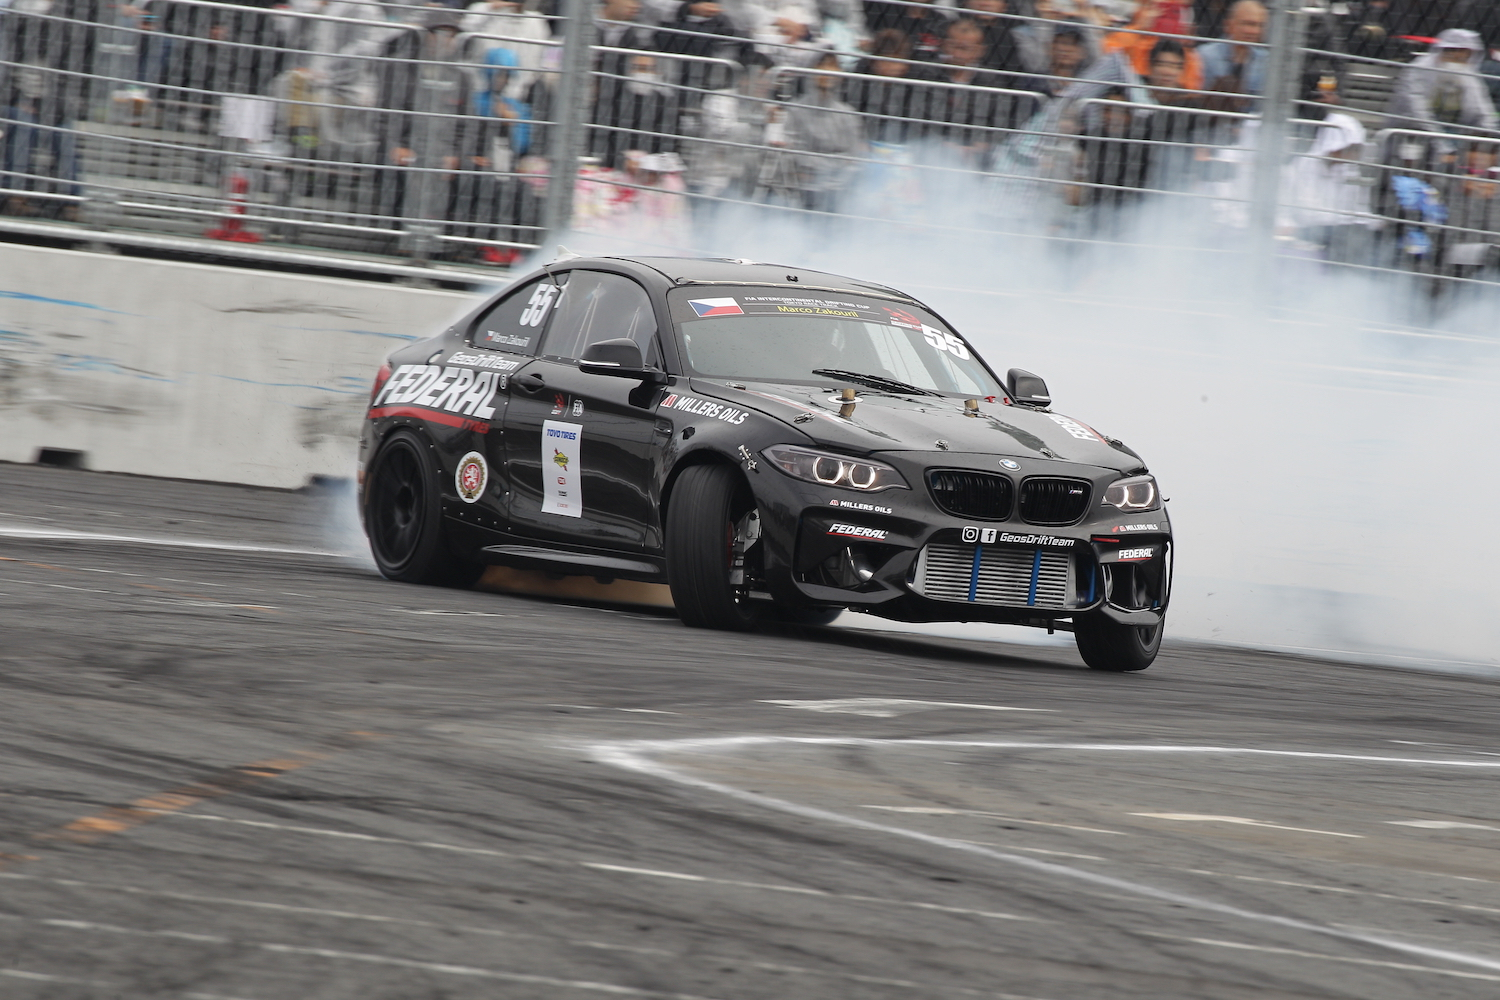 INTERCONTINENTAL DRIFTING CUP MOVES TO TSUKUBA FOR 2019